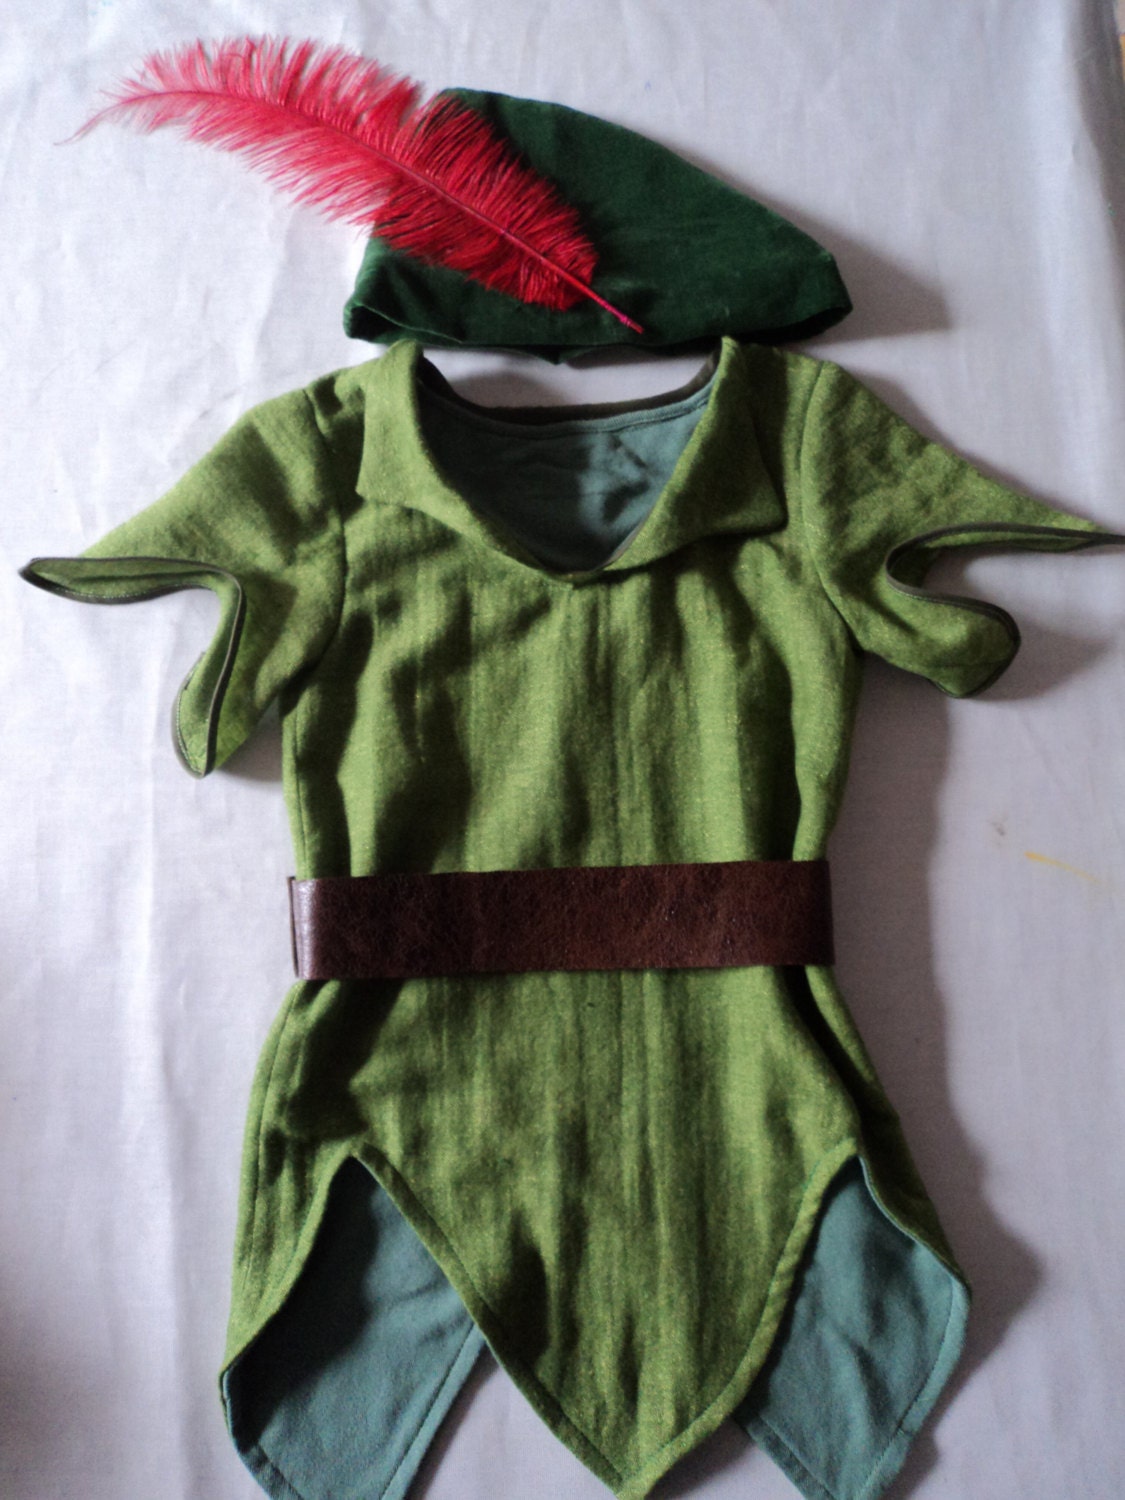 Peter Pan Tunic and Feathered Cap ADULT SIZE hq nude pic